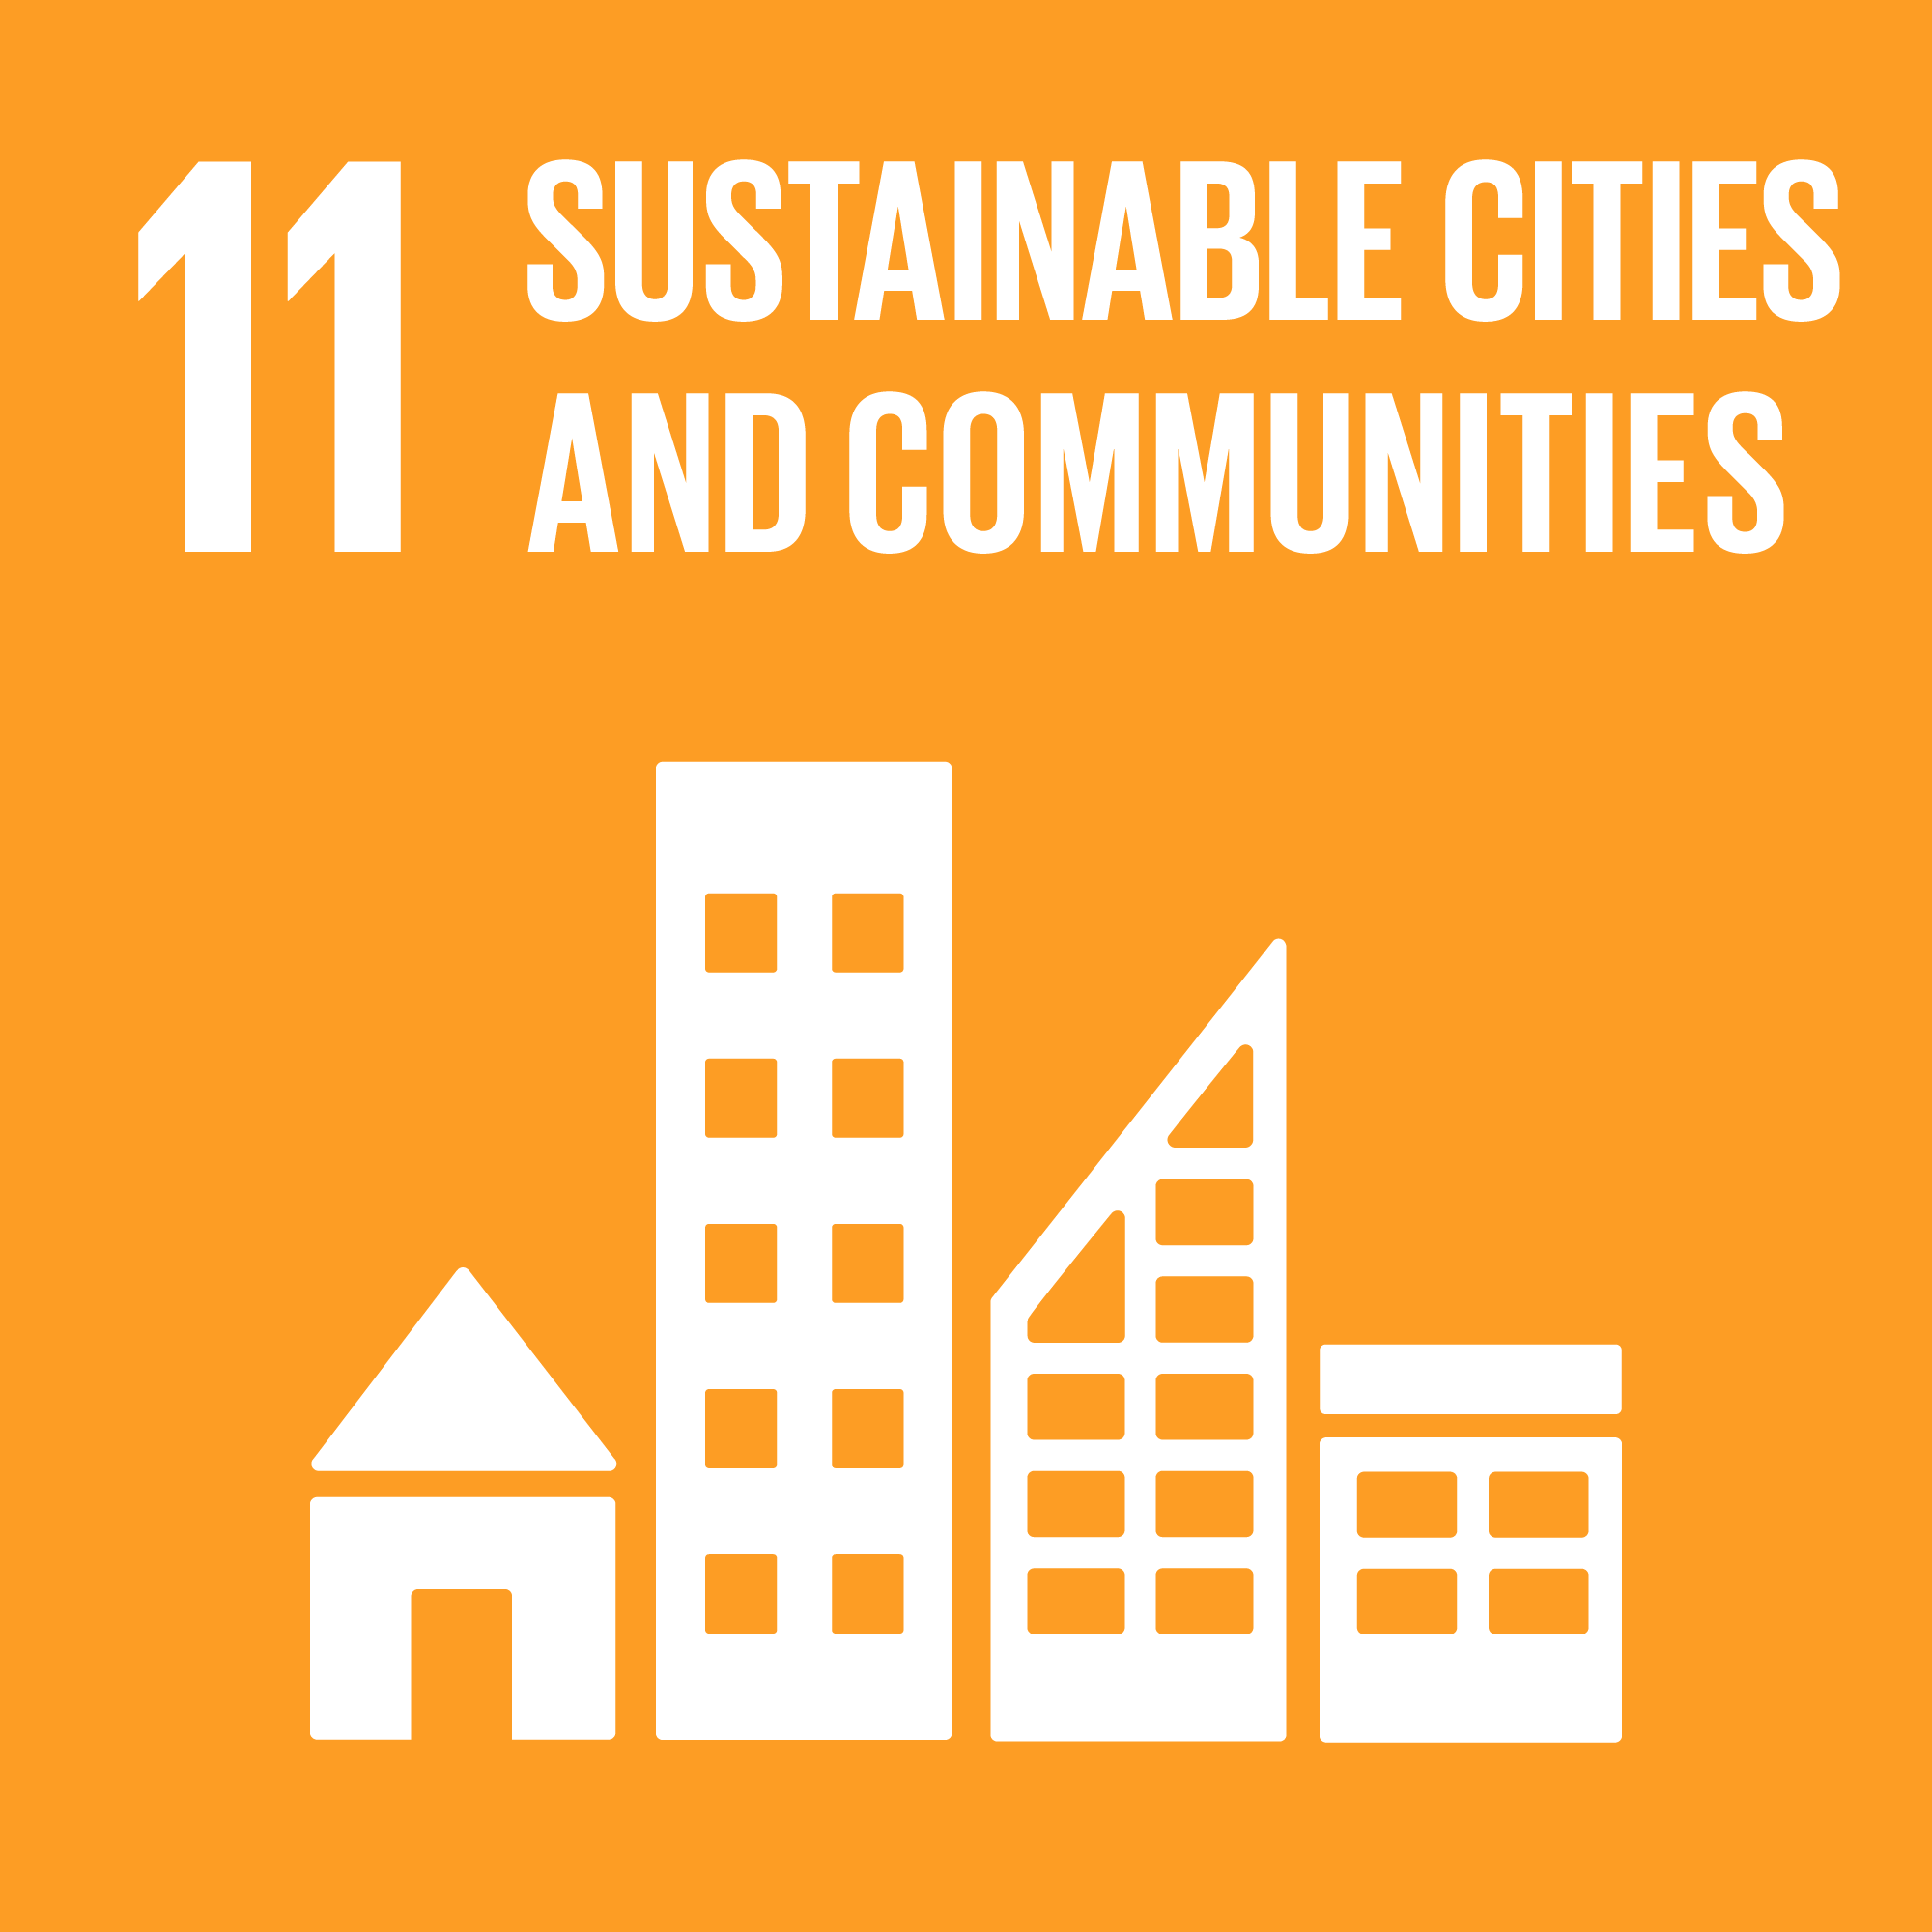 SDG 11: Sustainable cities and communities